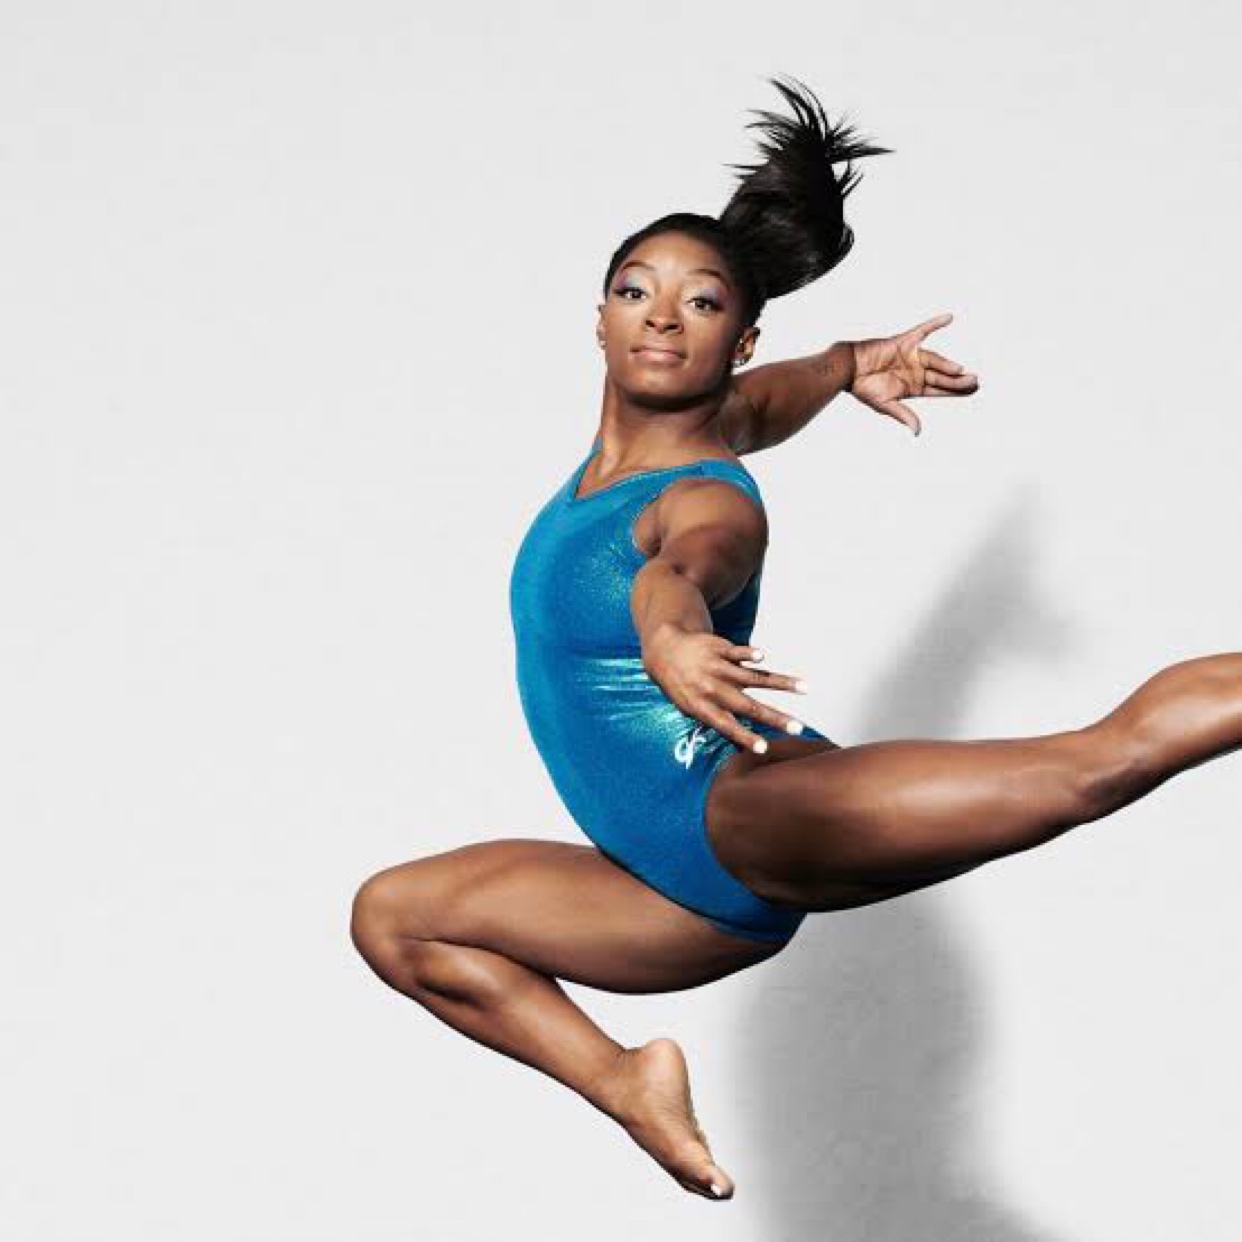 Here’s The Real Reason Why Simone Biles Quit The Olympics